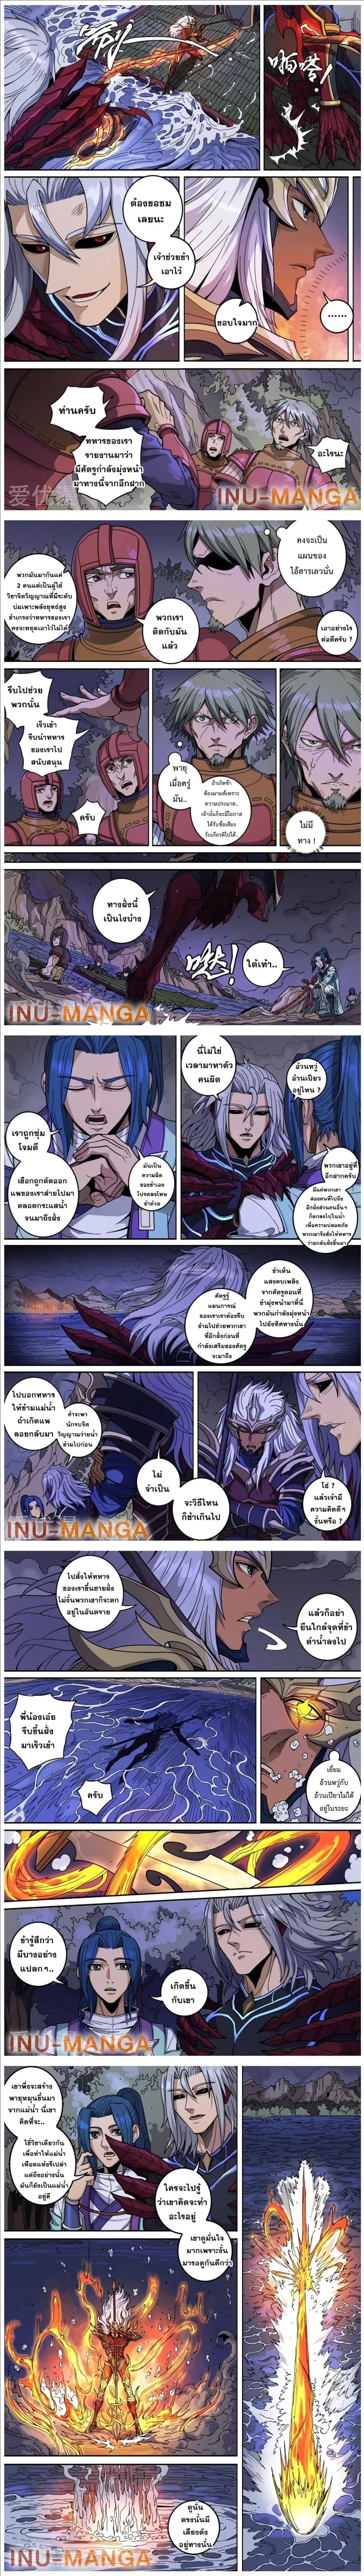 Tangyan in The Other World 134 (3)